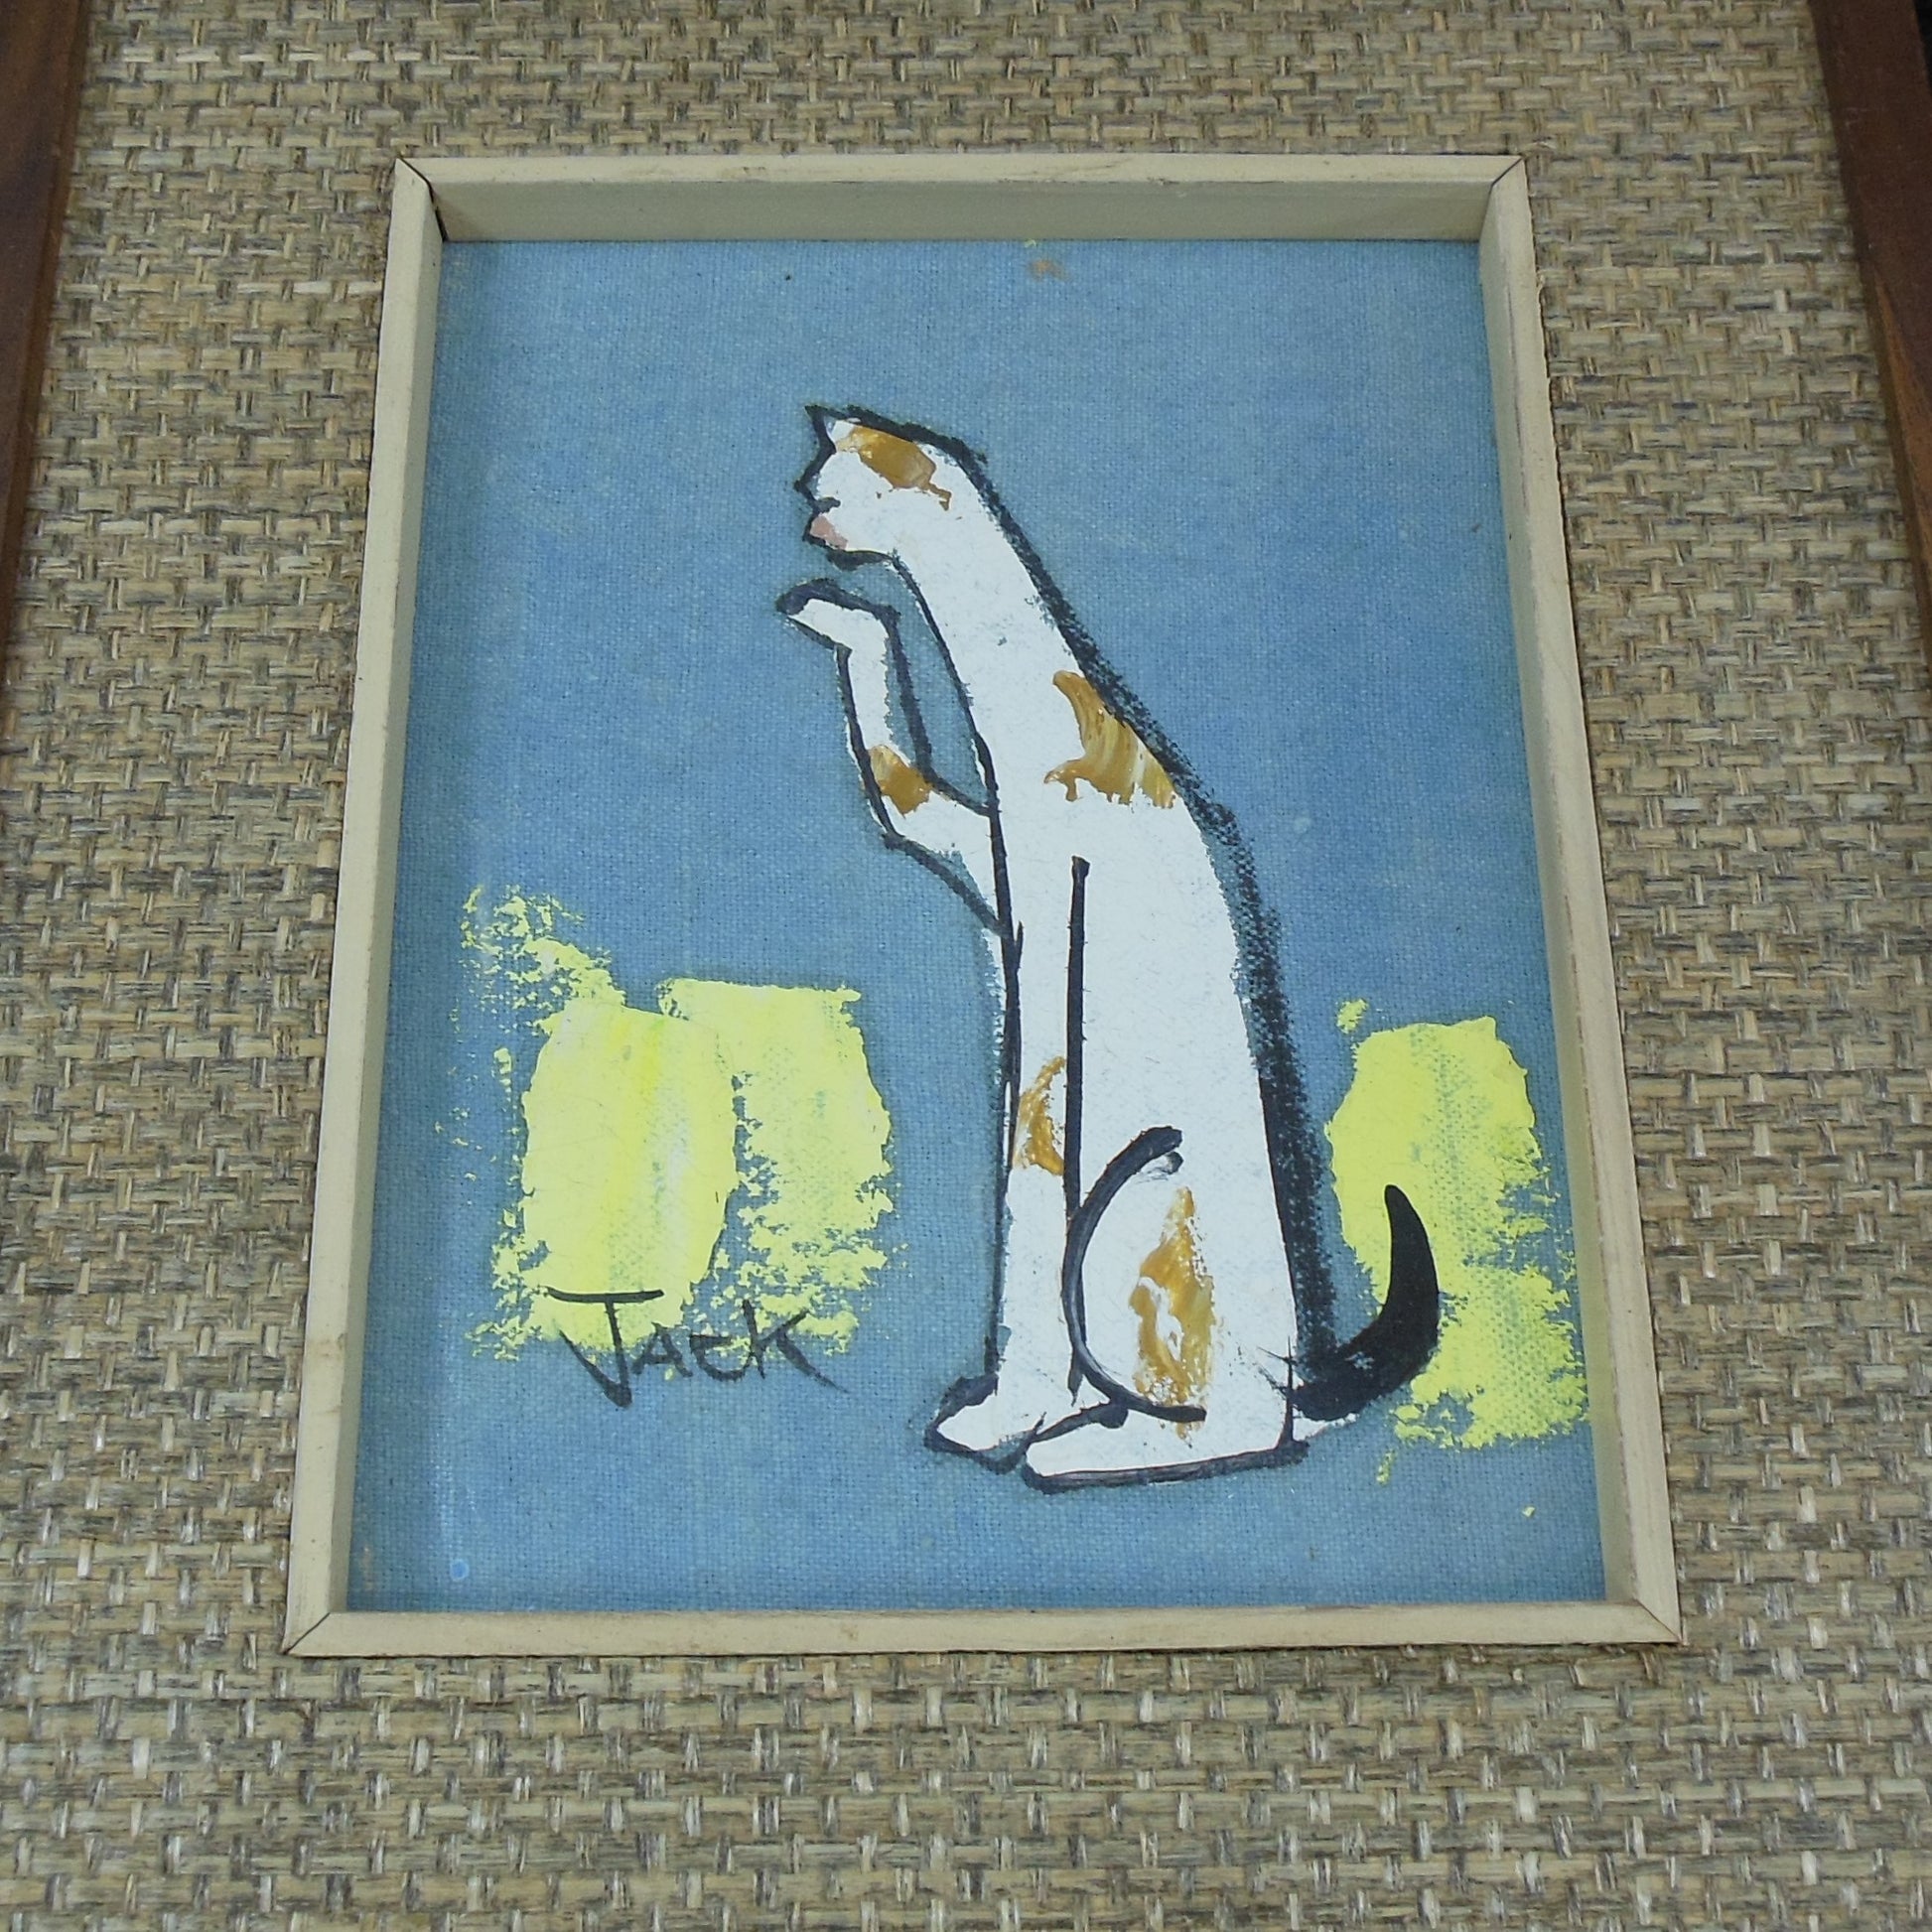 Jack Fang 1960's Whimsical Animal Paintings Goat Pig Cat Owls Chinese